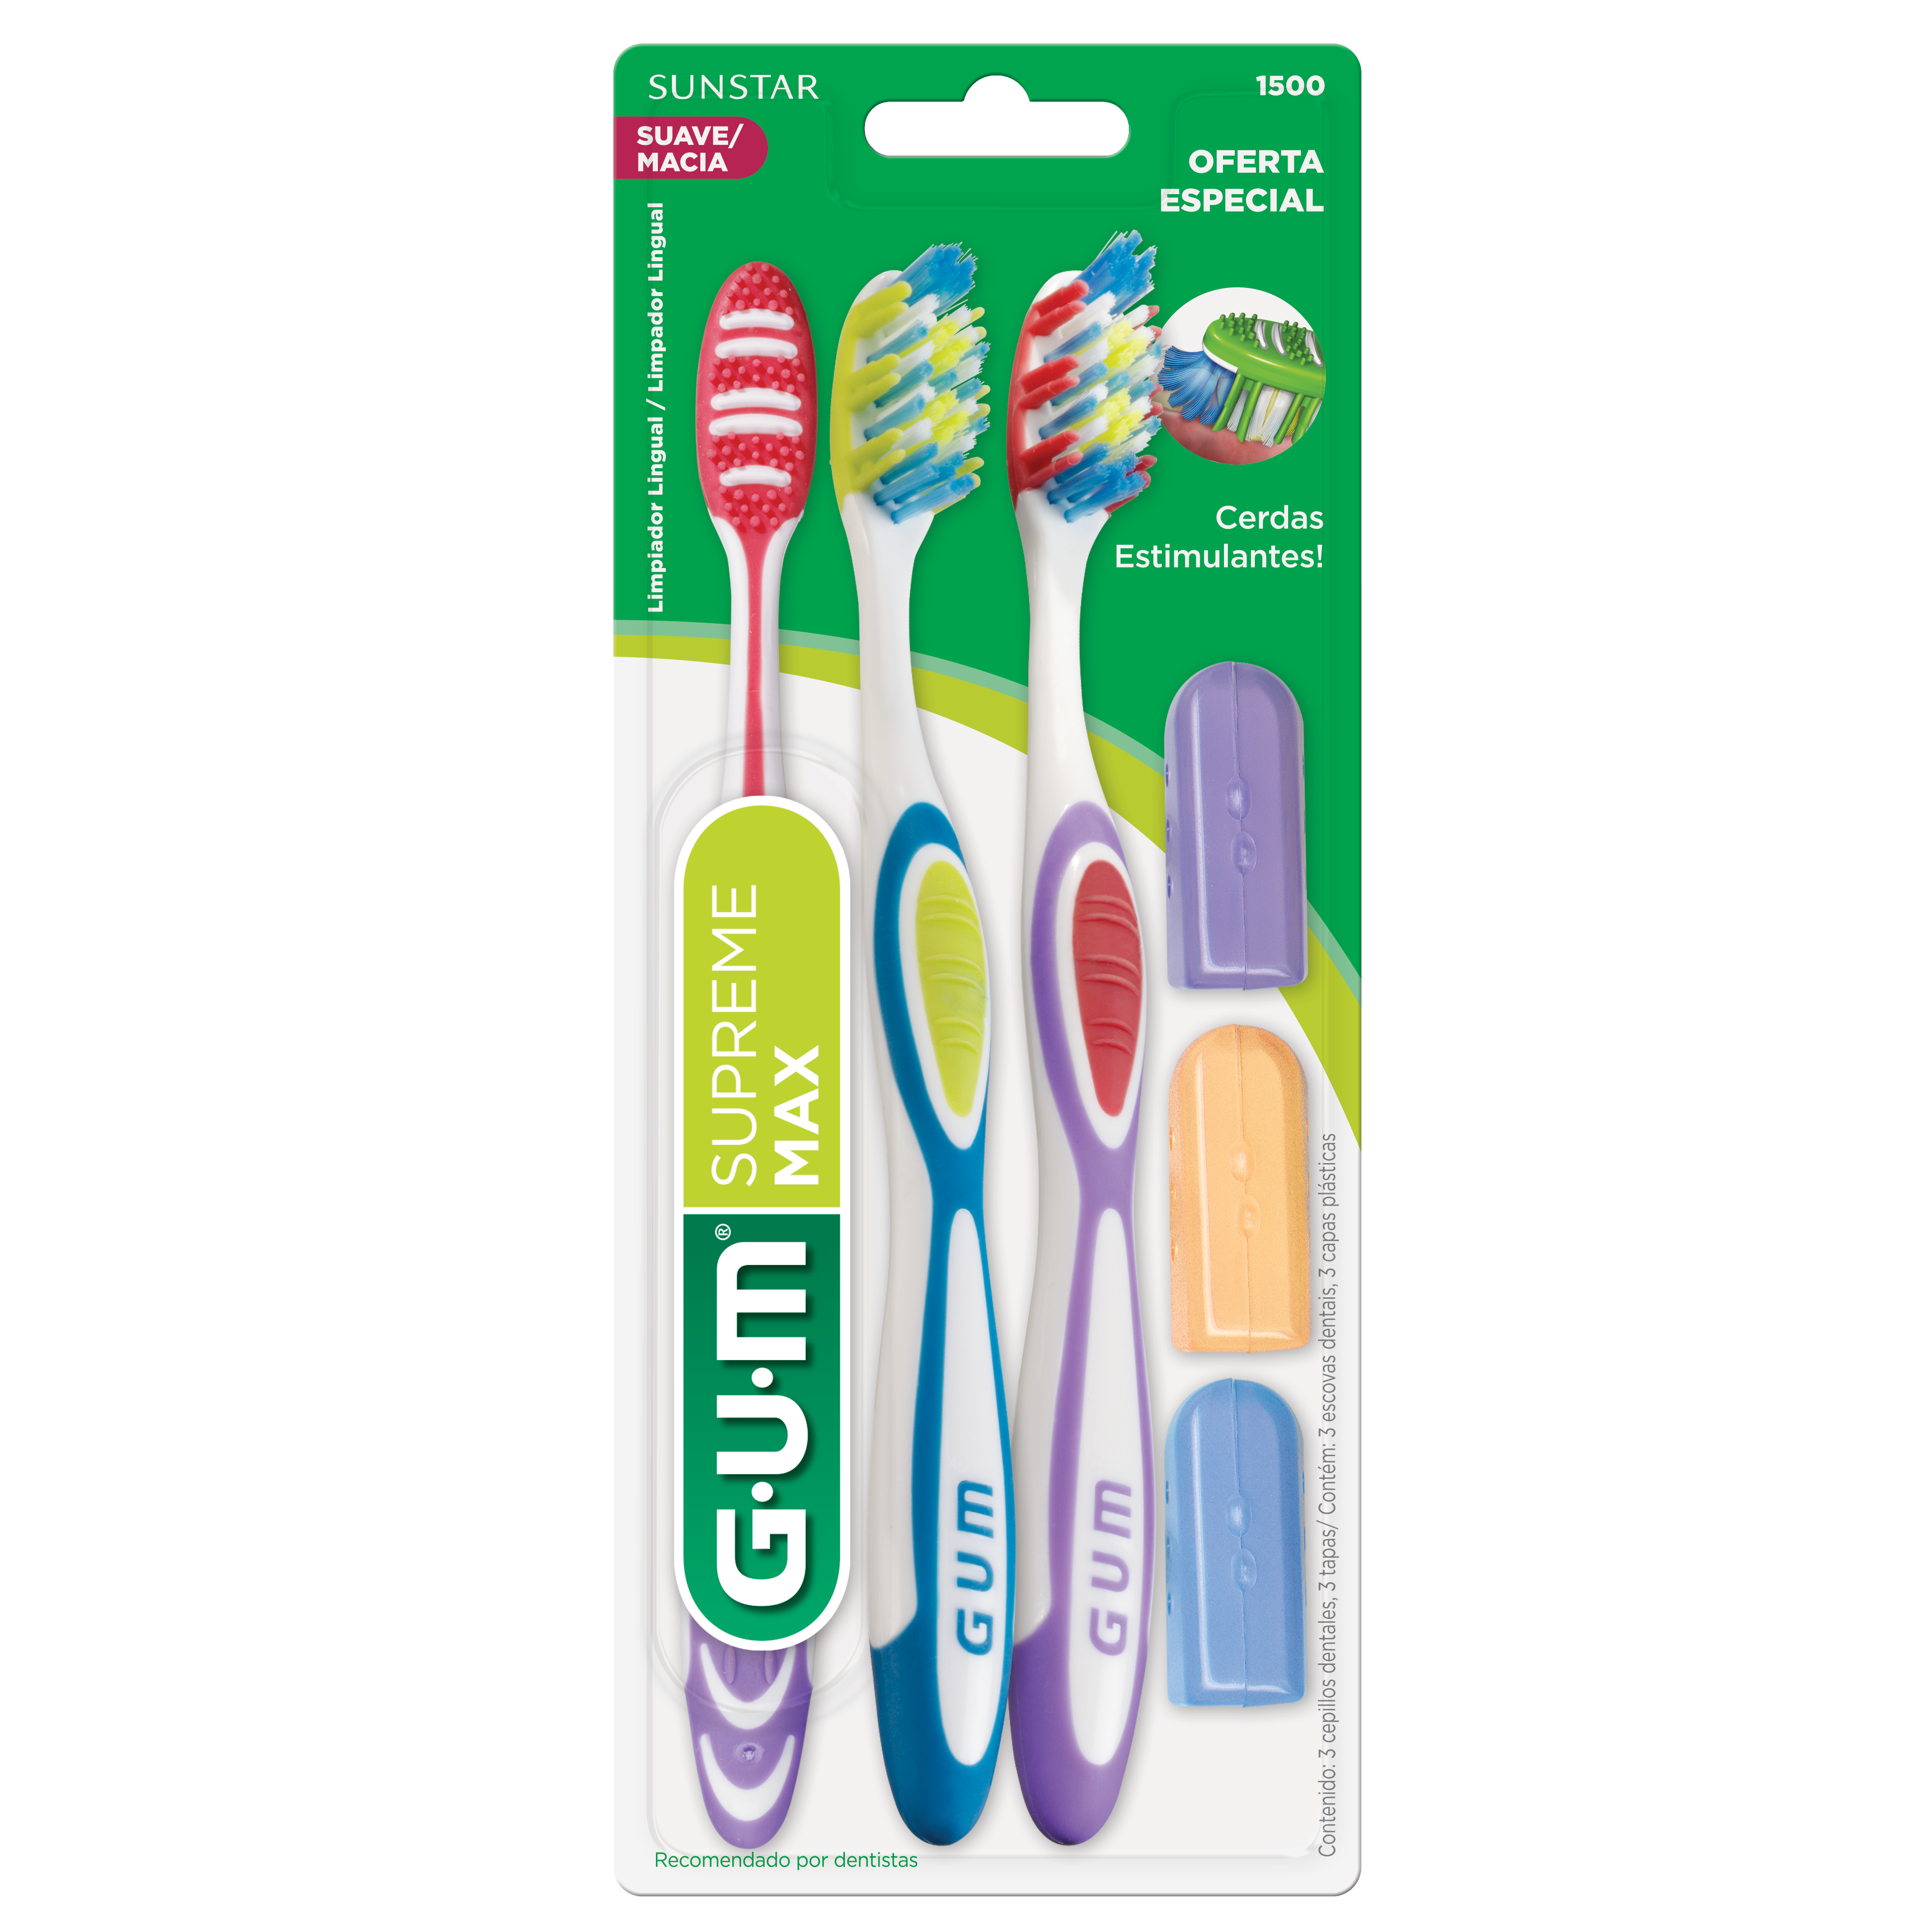 1500LT3-Product-Packaging-Toothbrush-Supreme-Max-front-3x3.png